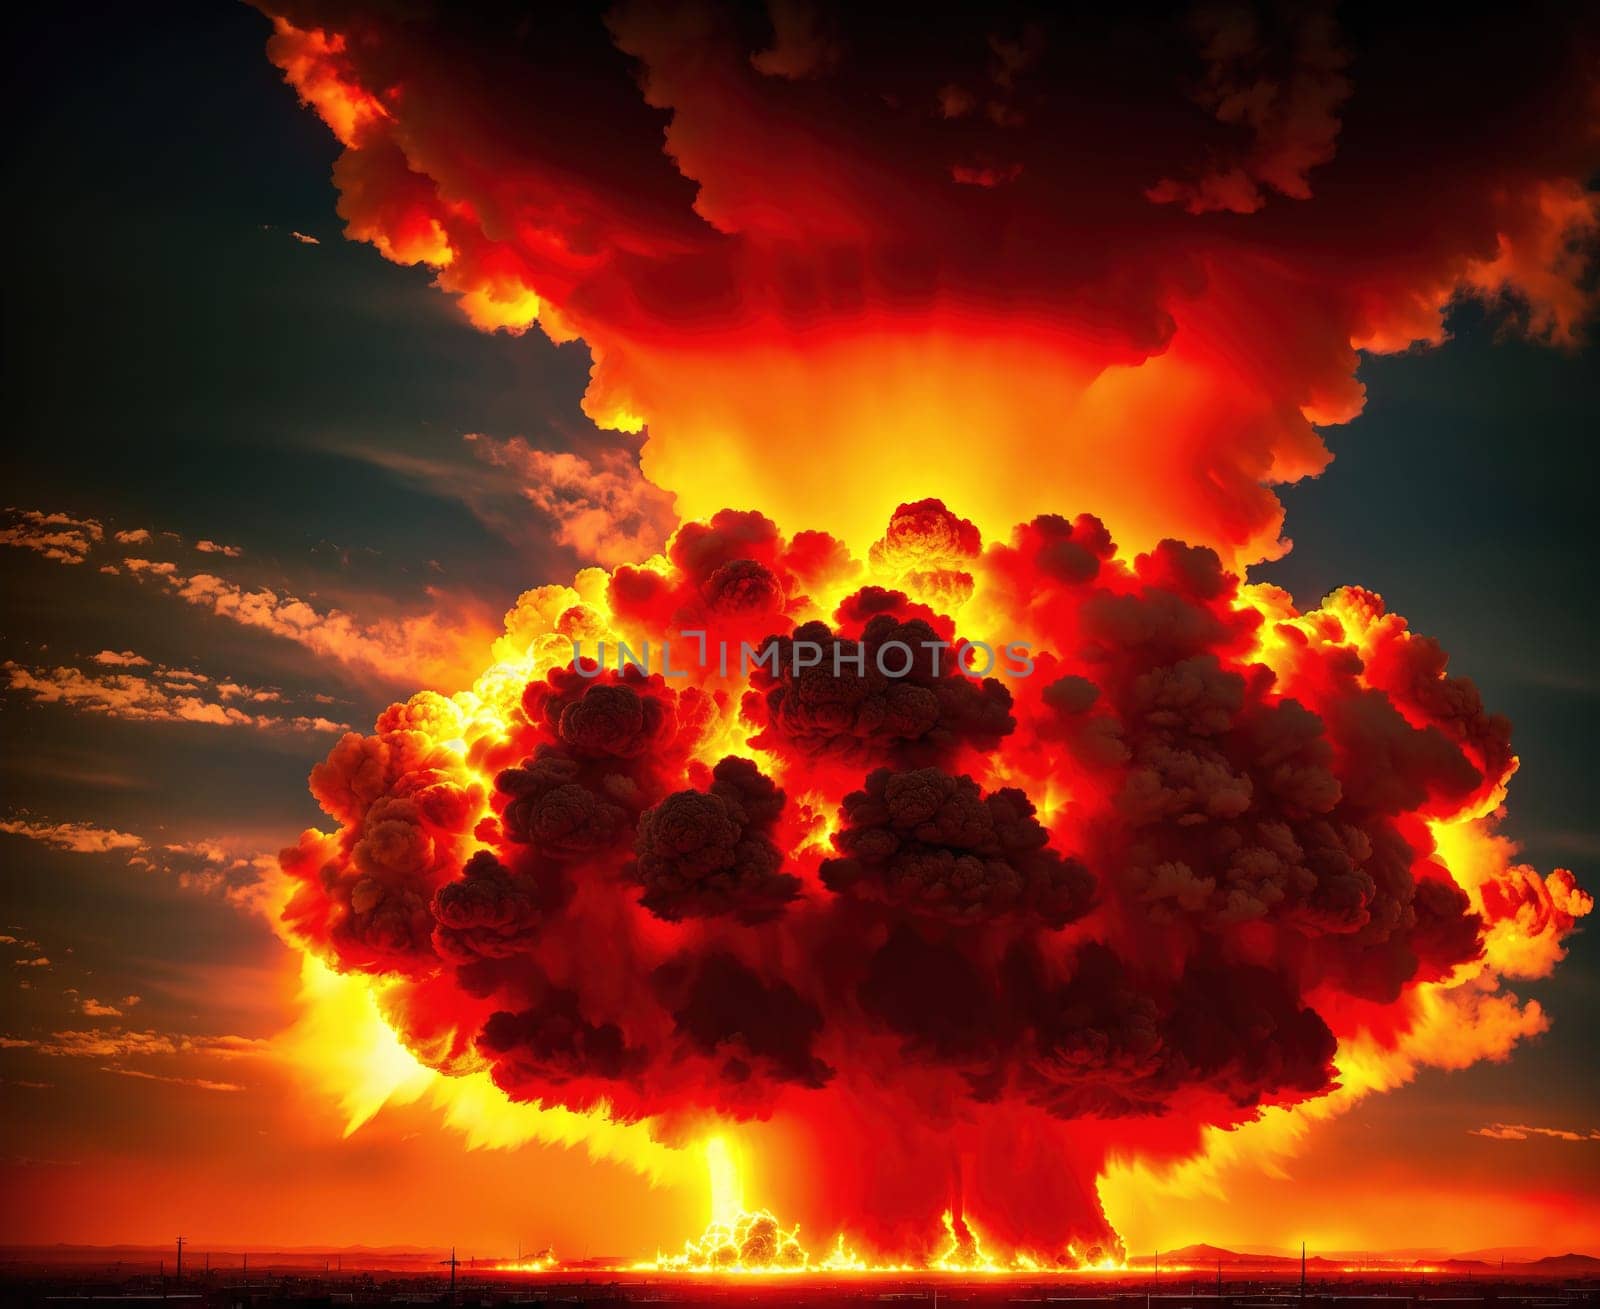 The image depicts a mushroom cloud rising from the ground, with the sun setting in the background.